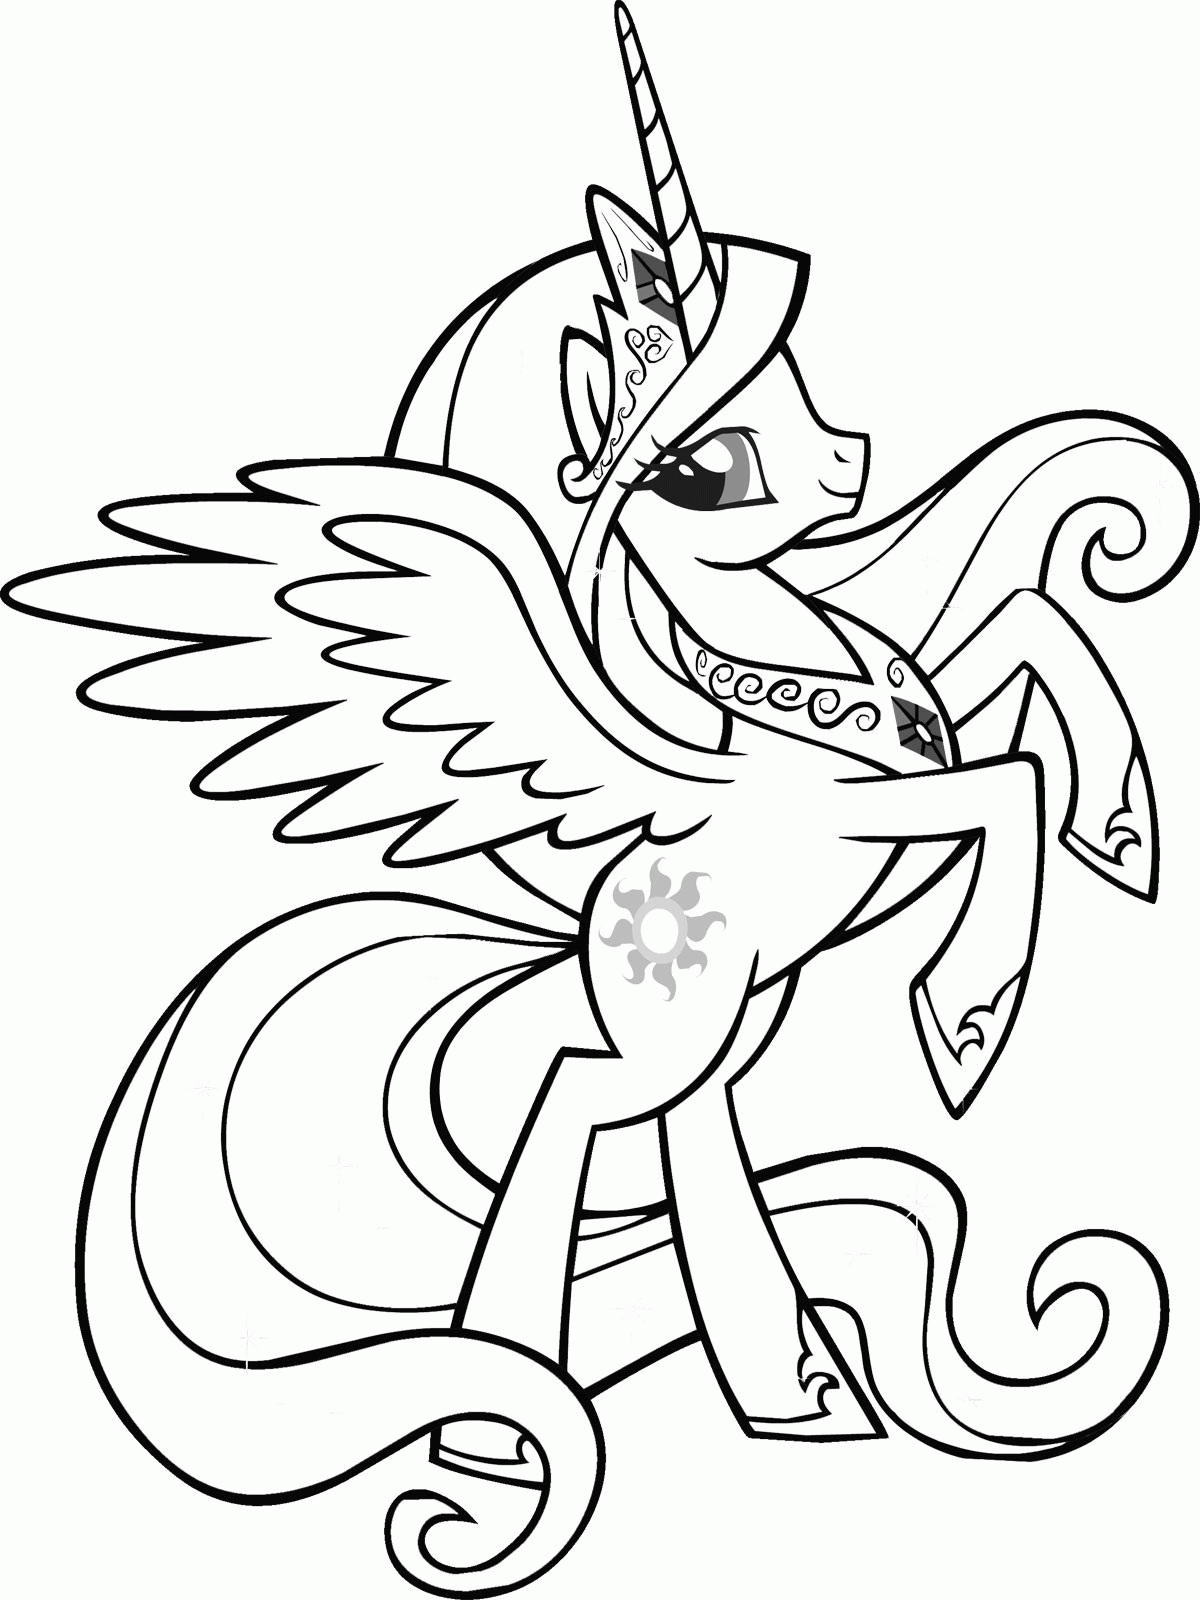 Coloring Pages Of A Unicorn - Coloring Home